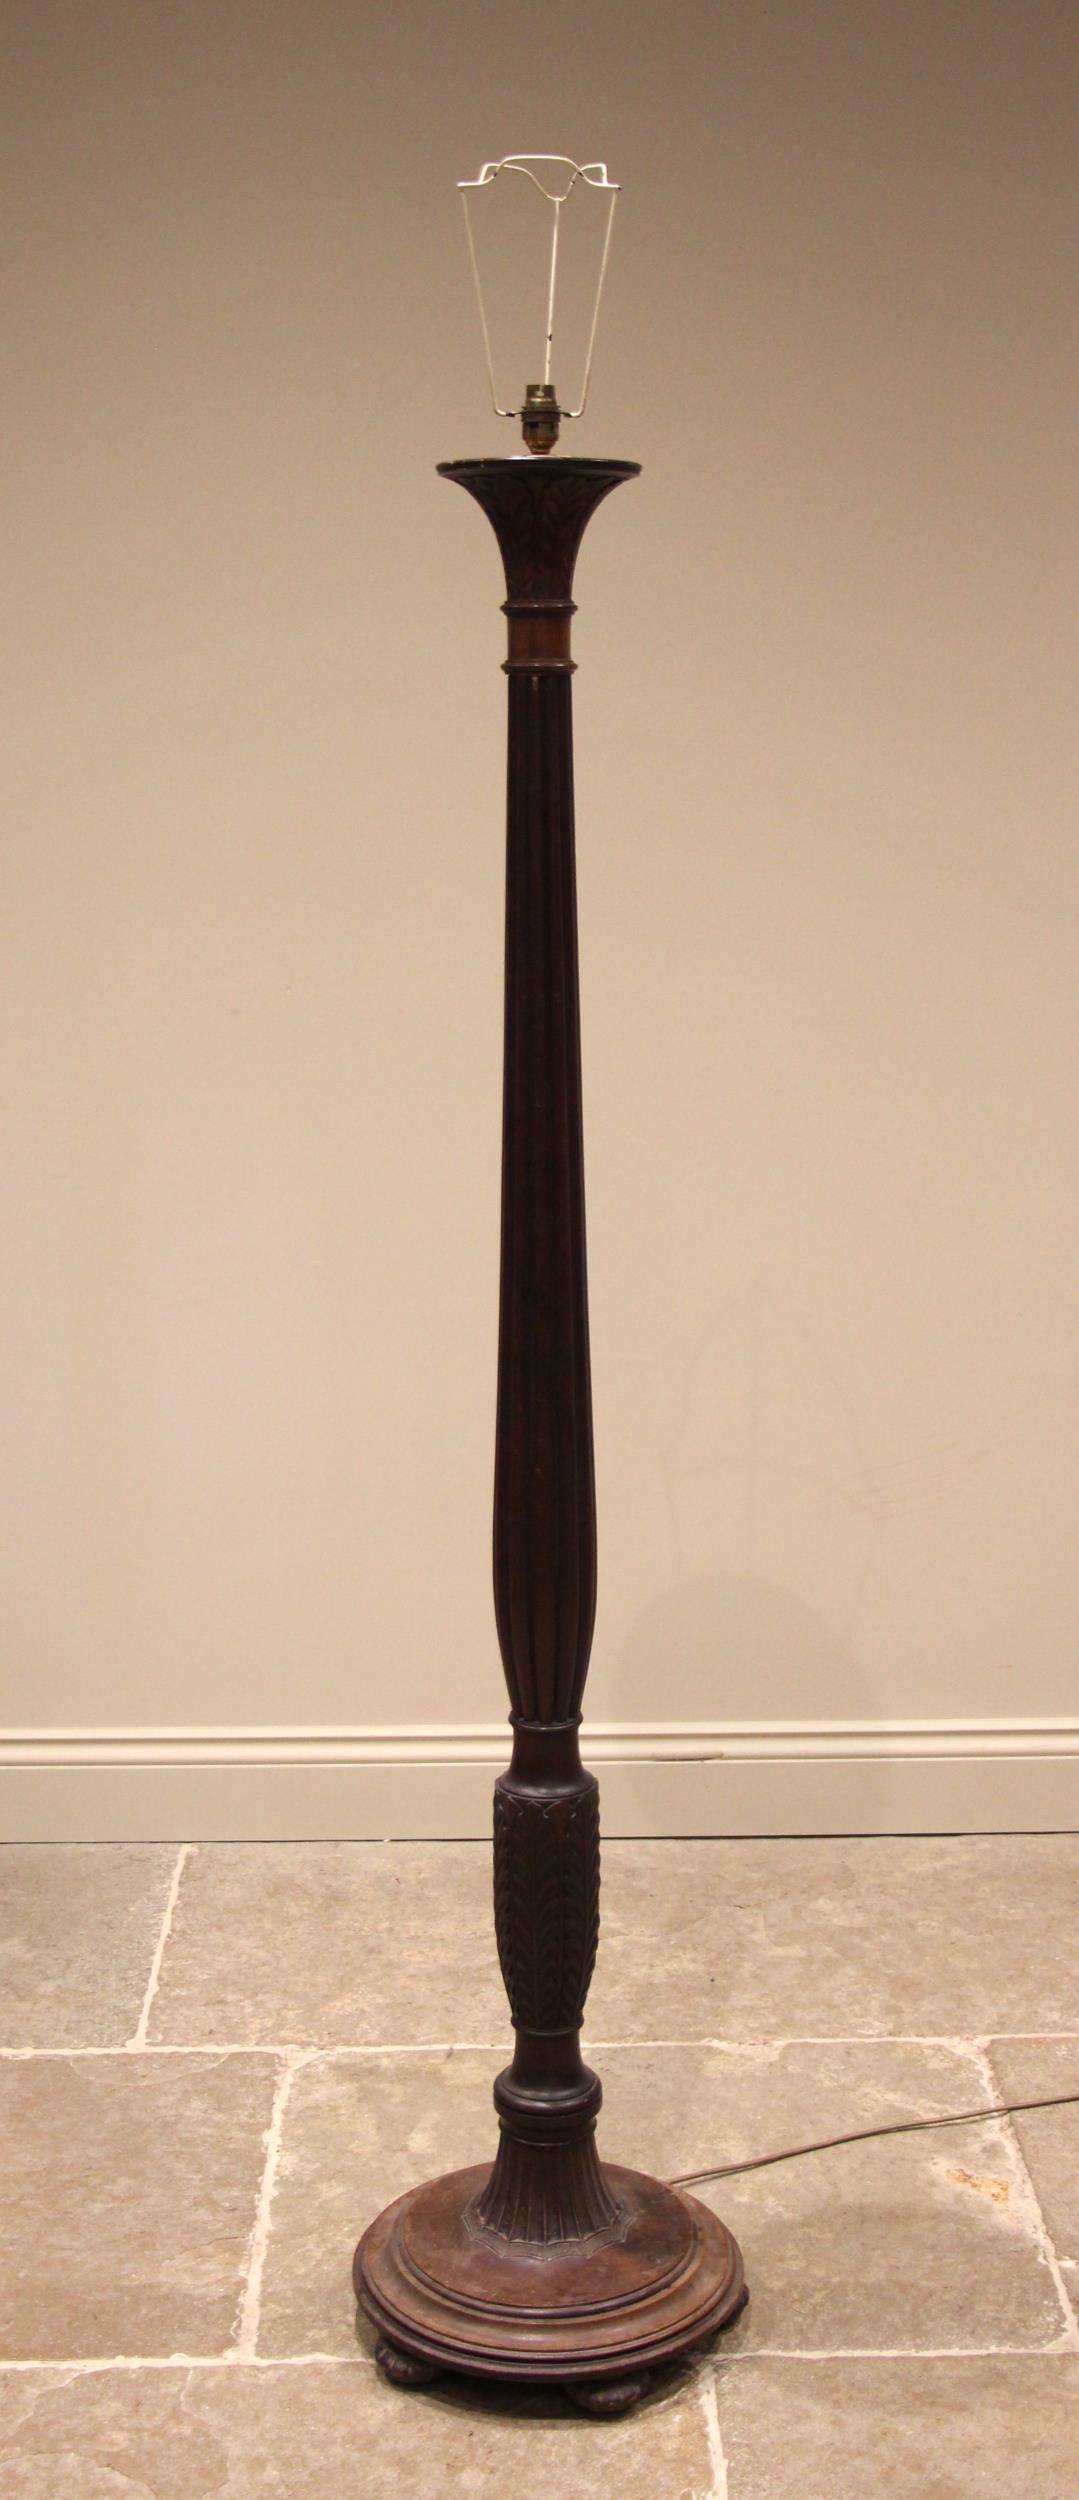 A Regency style mahogany standard lamp, early 20th century, the reeded acanthus column extending